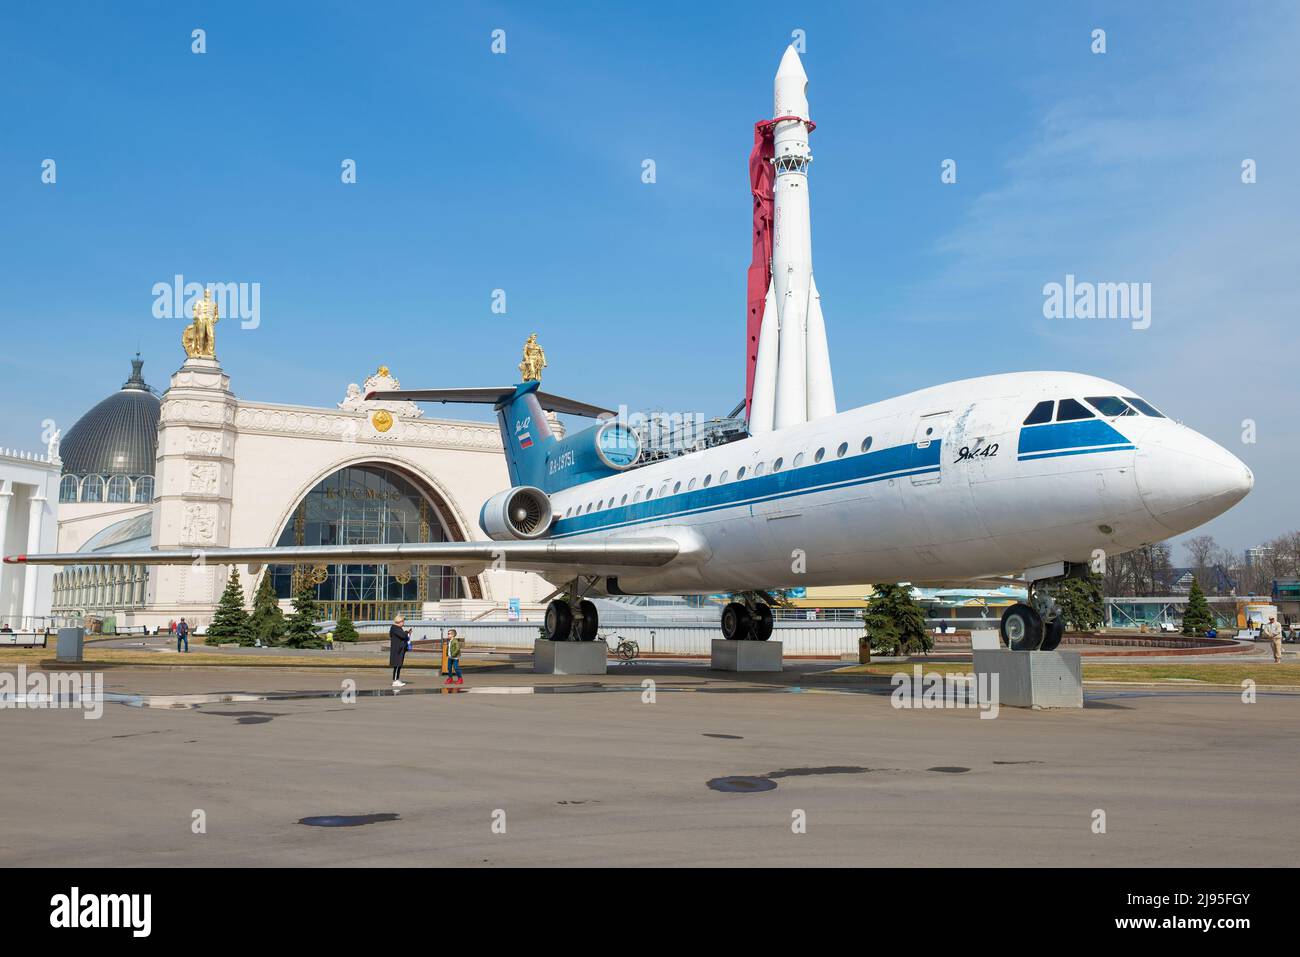 MOSCOW, RUSSIA - APRIL 14, 2021: Soviet aircraft of Yak-42 on the territory of the All-Russian Exhibition Center (VDNKh) on a sunny April day Stock Photo